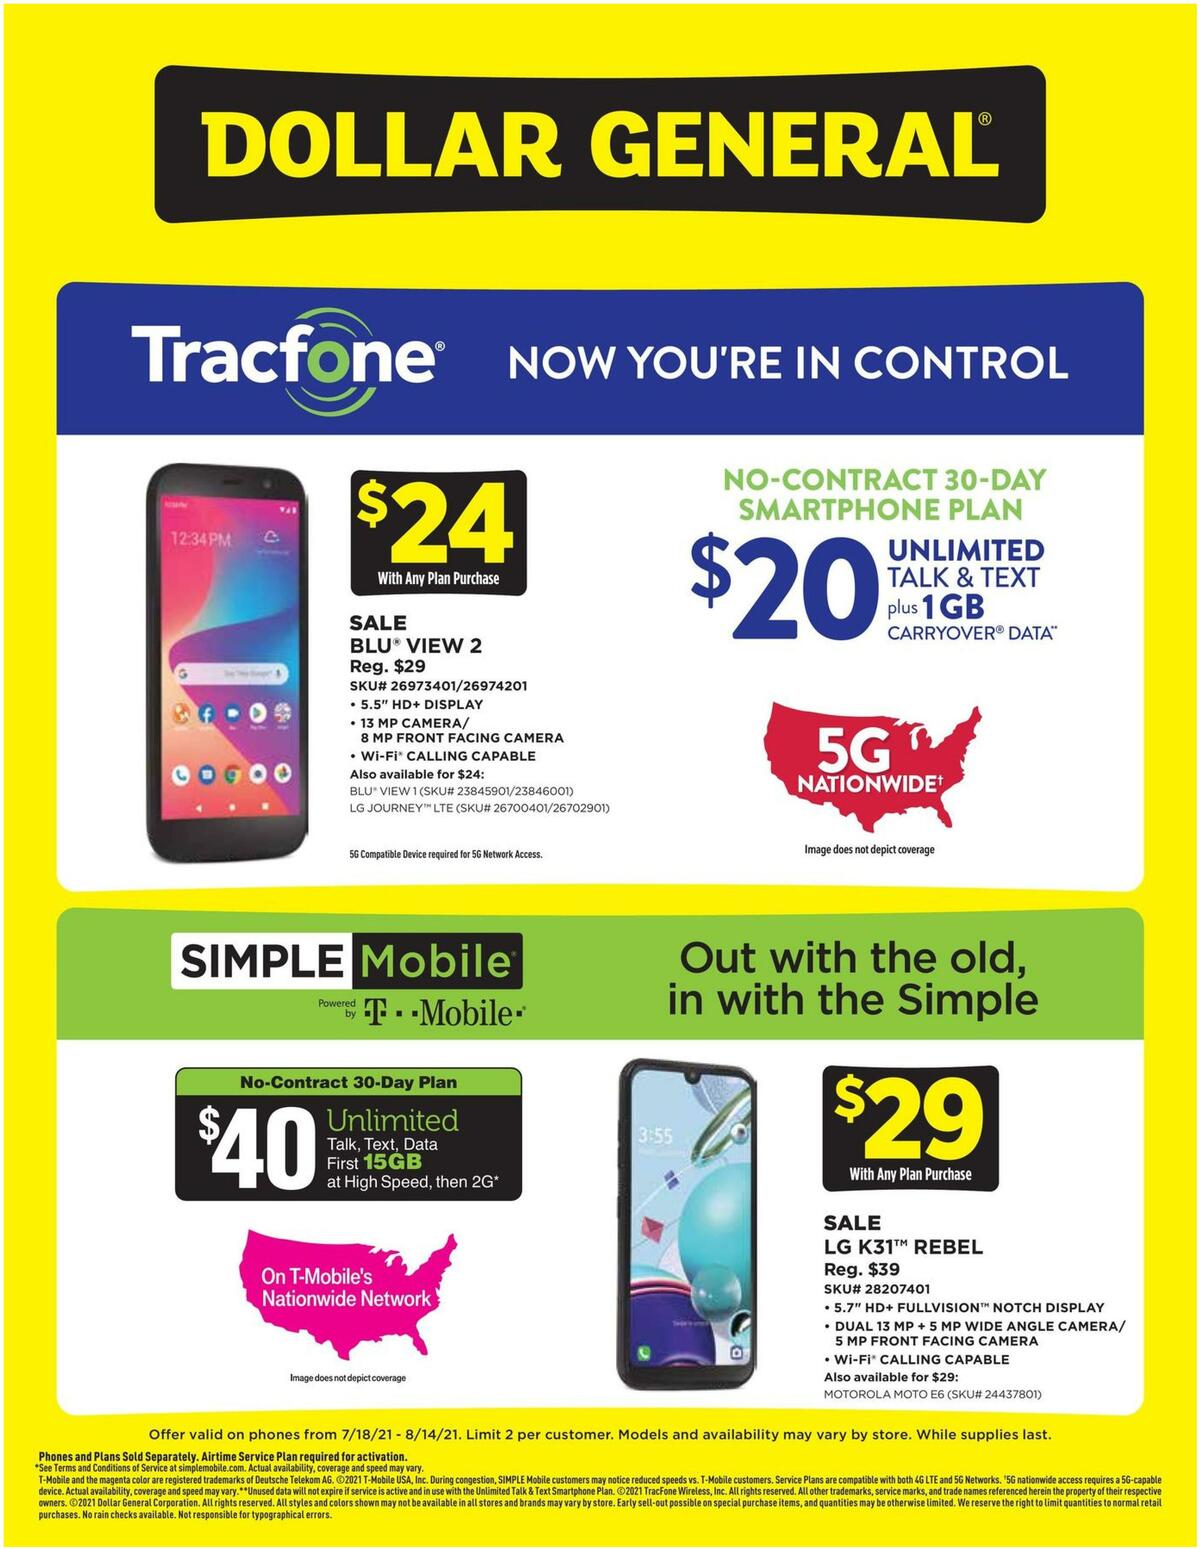 Dollar General Weekly Wireless Specials Weekly Ad from July 18